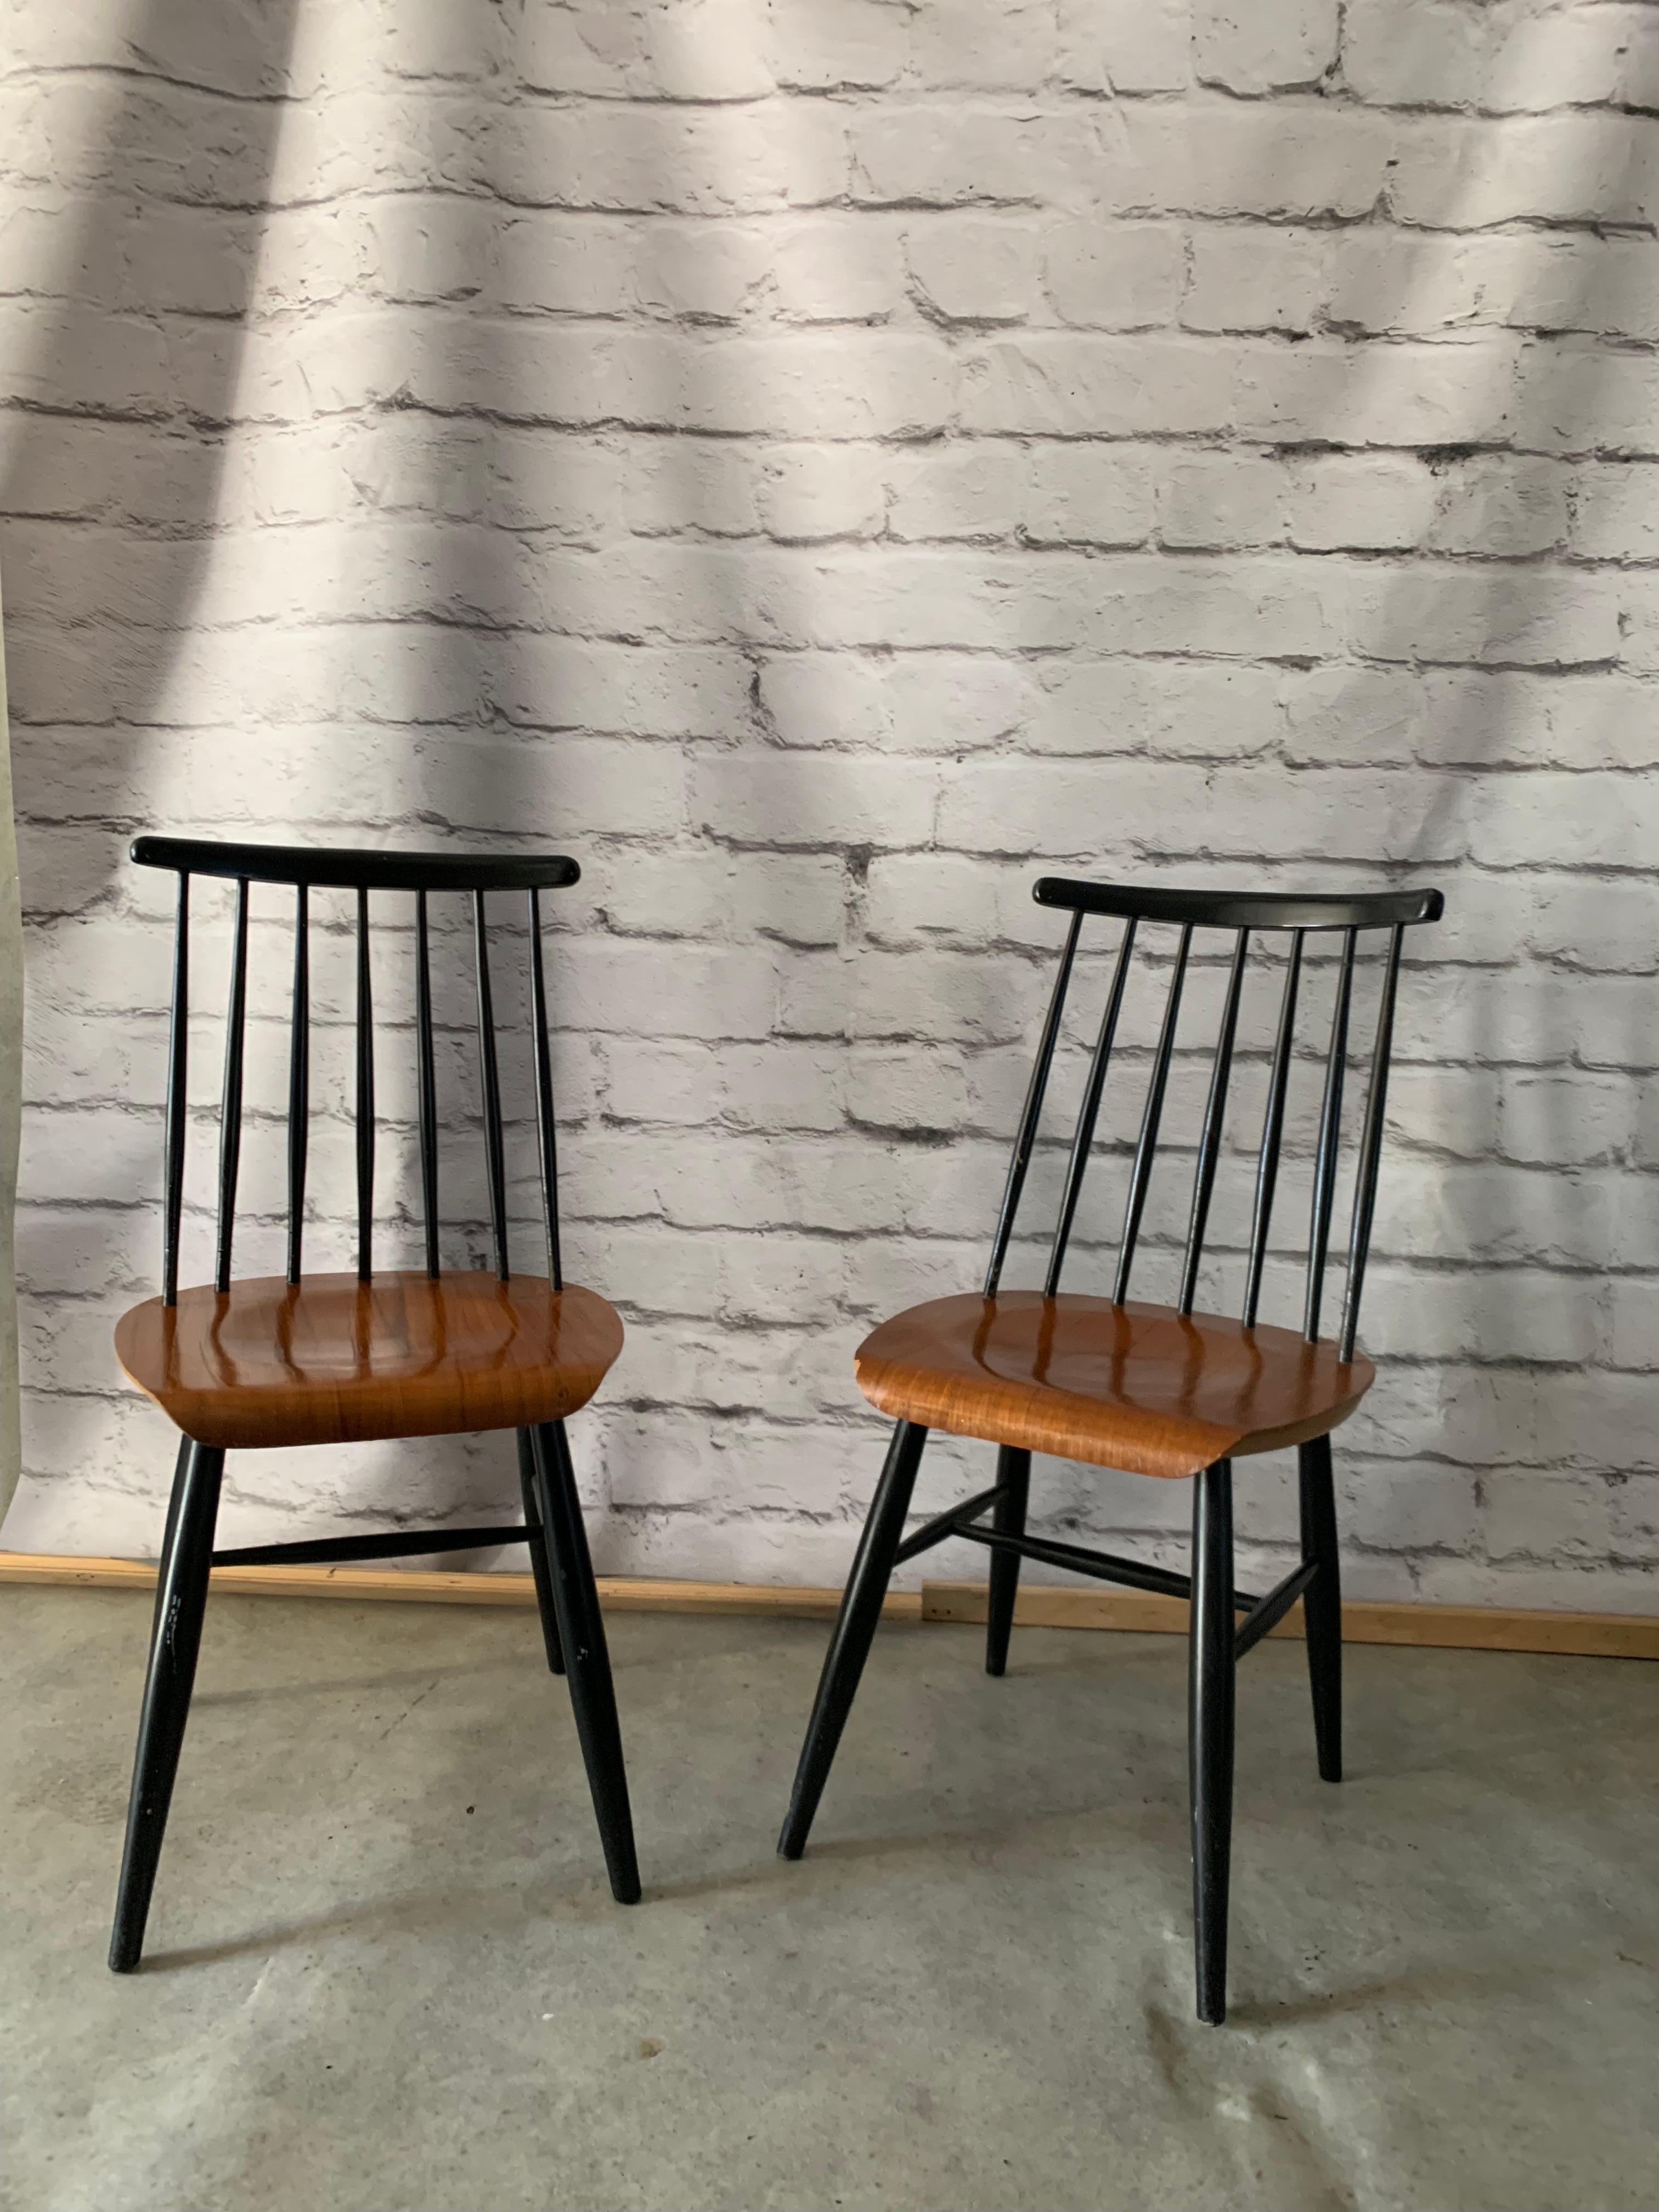 Set of 2 dining chairs made of teak plywood and black painted legs and spindle backs. Chairs are in good condition, slightly refreshed. No marking, but the chairs are identical to the chairs produced by the Komnik label, signed by the Finnish